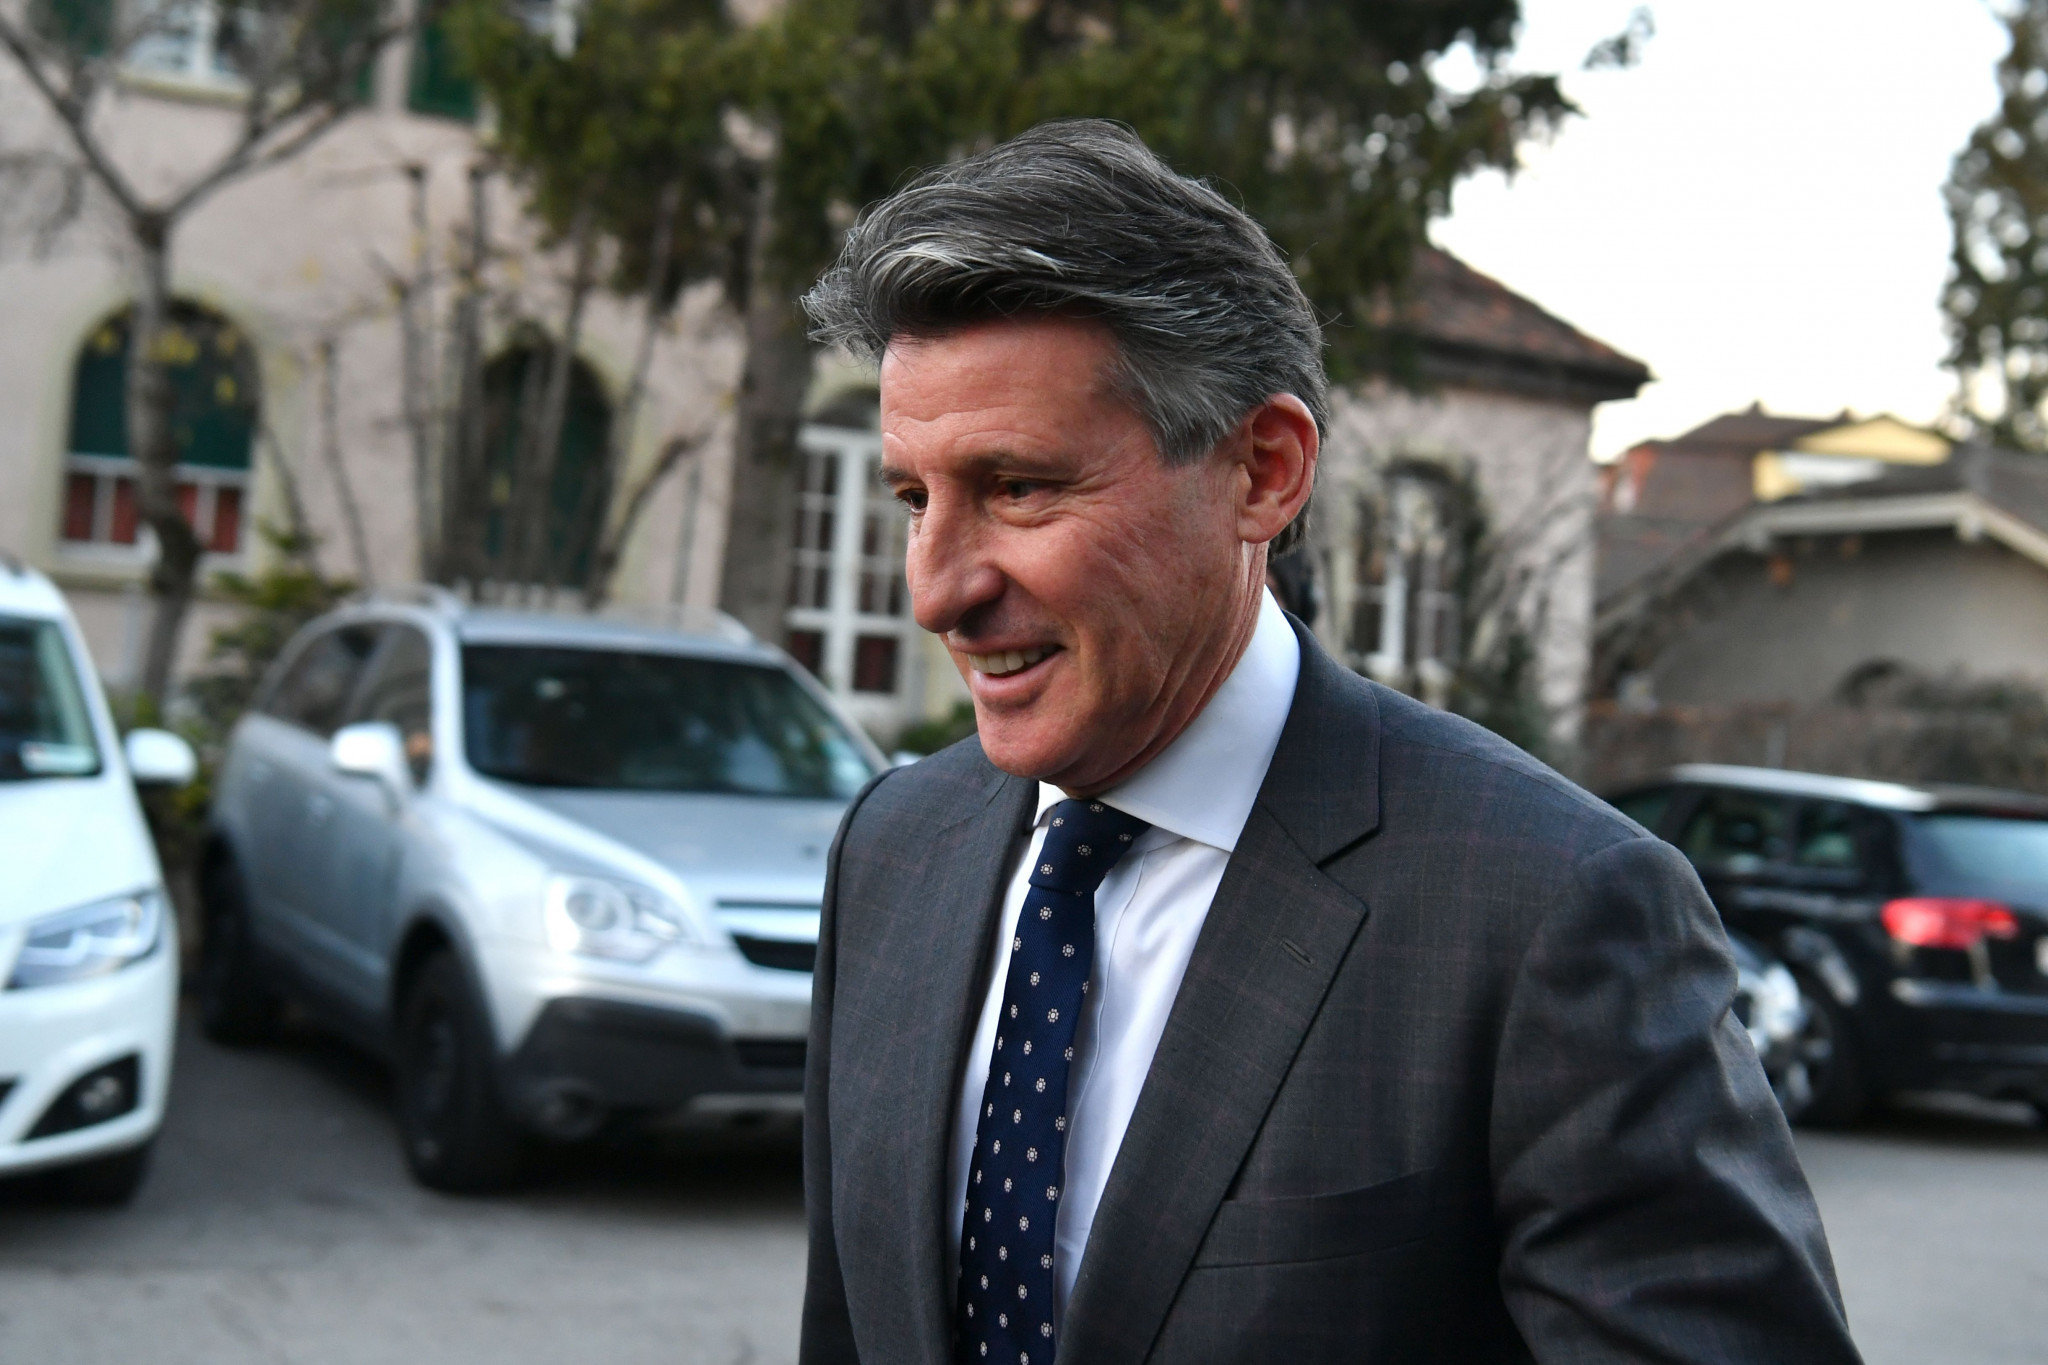 IAAF President Sebastian Coe has repeatedly said the rule is necessary in the interests of fairness ©Getty Images